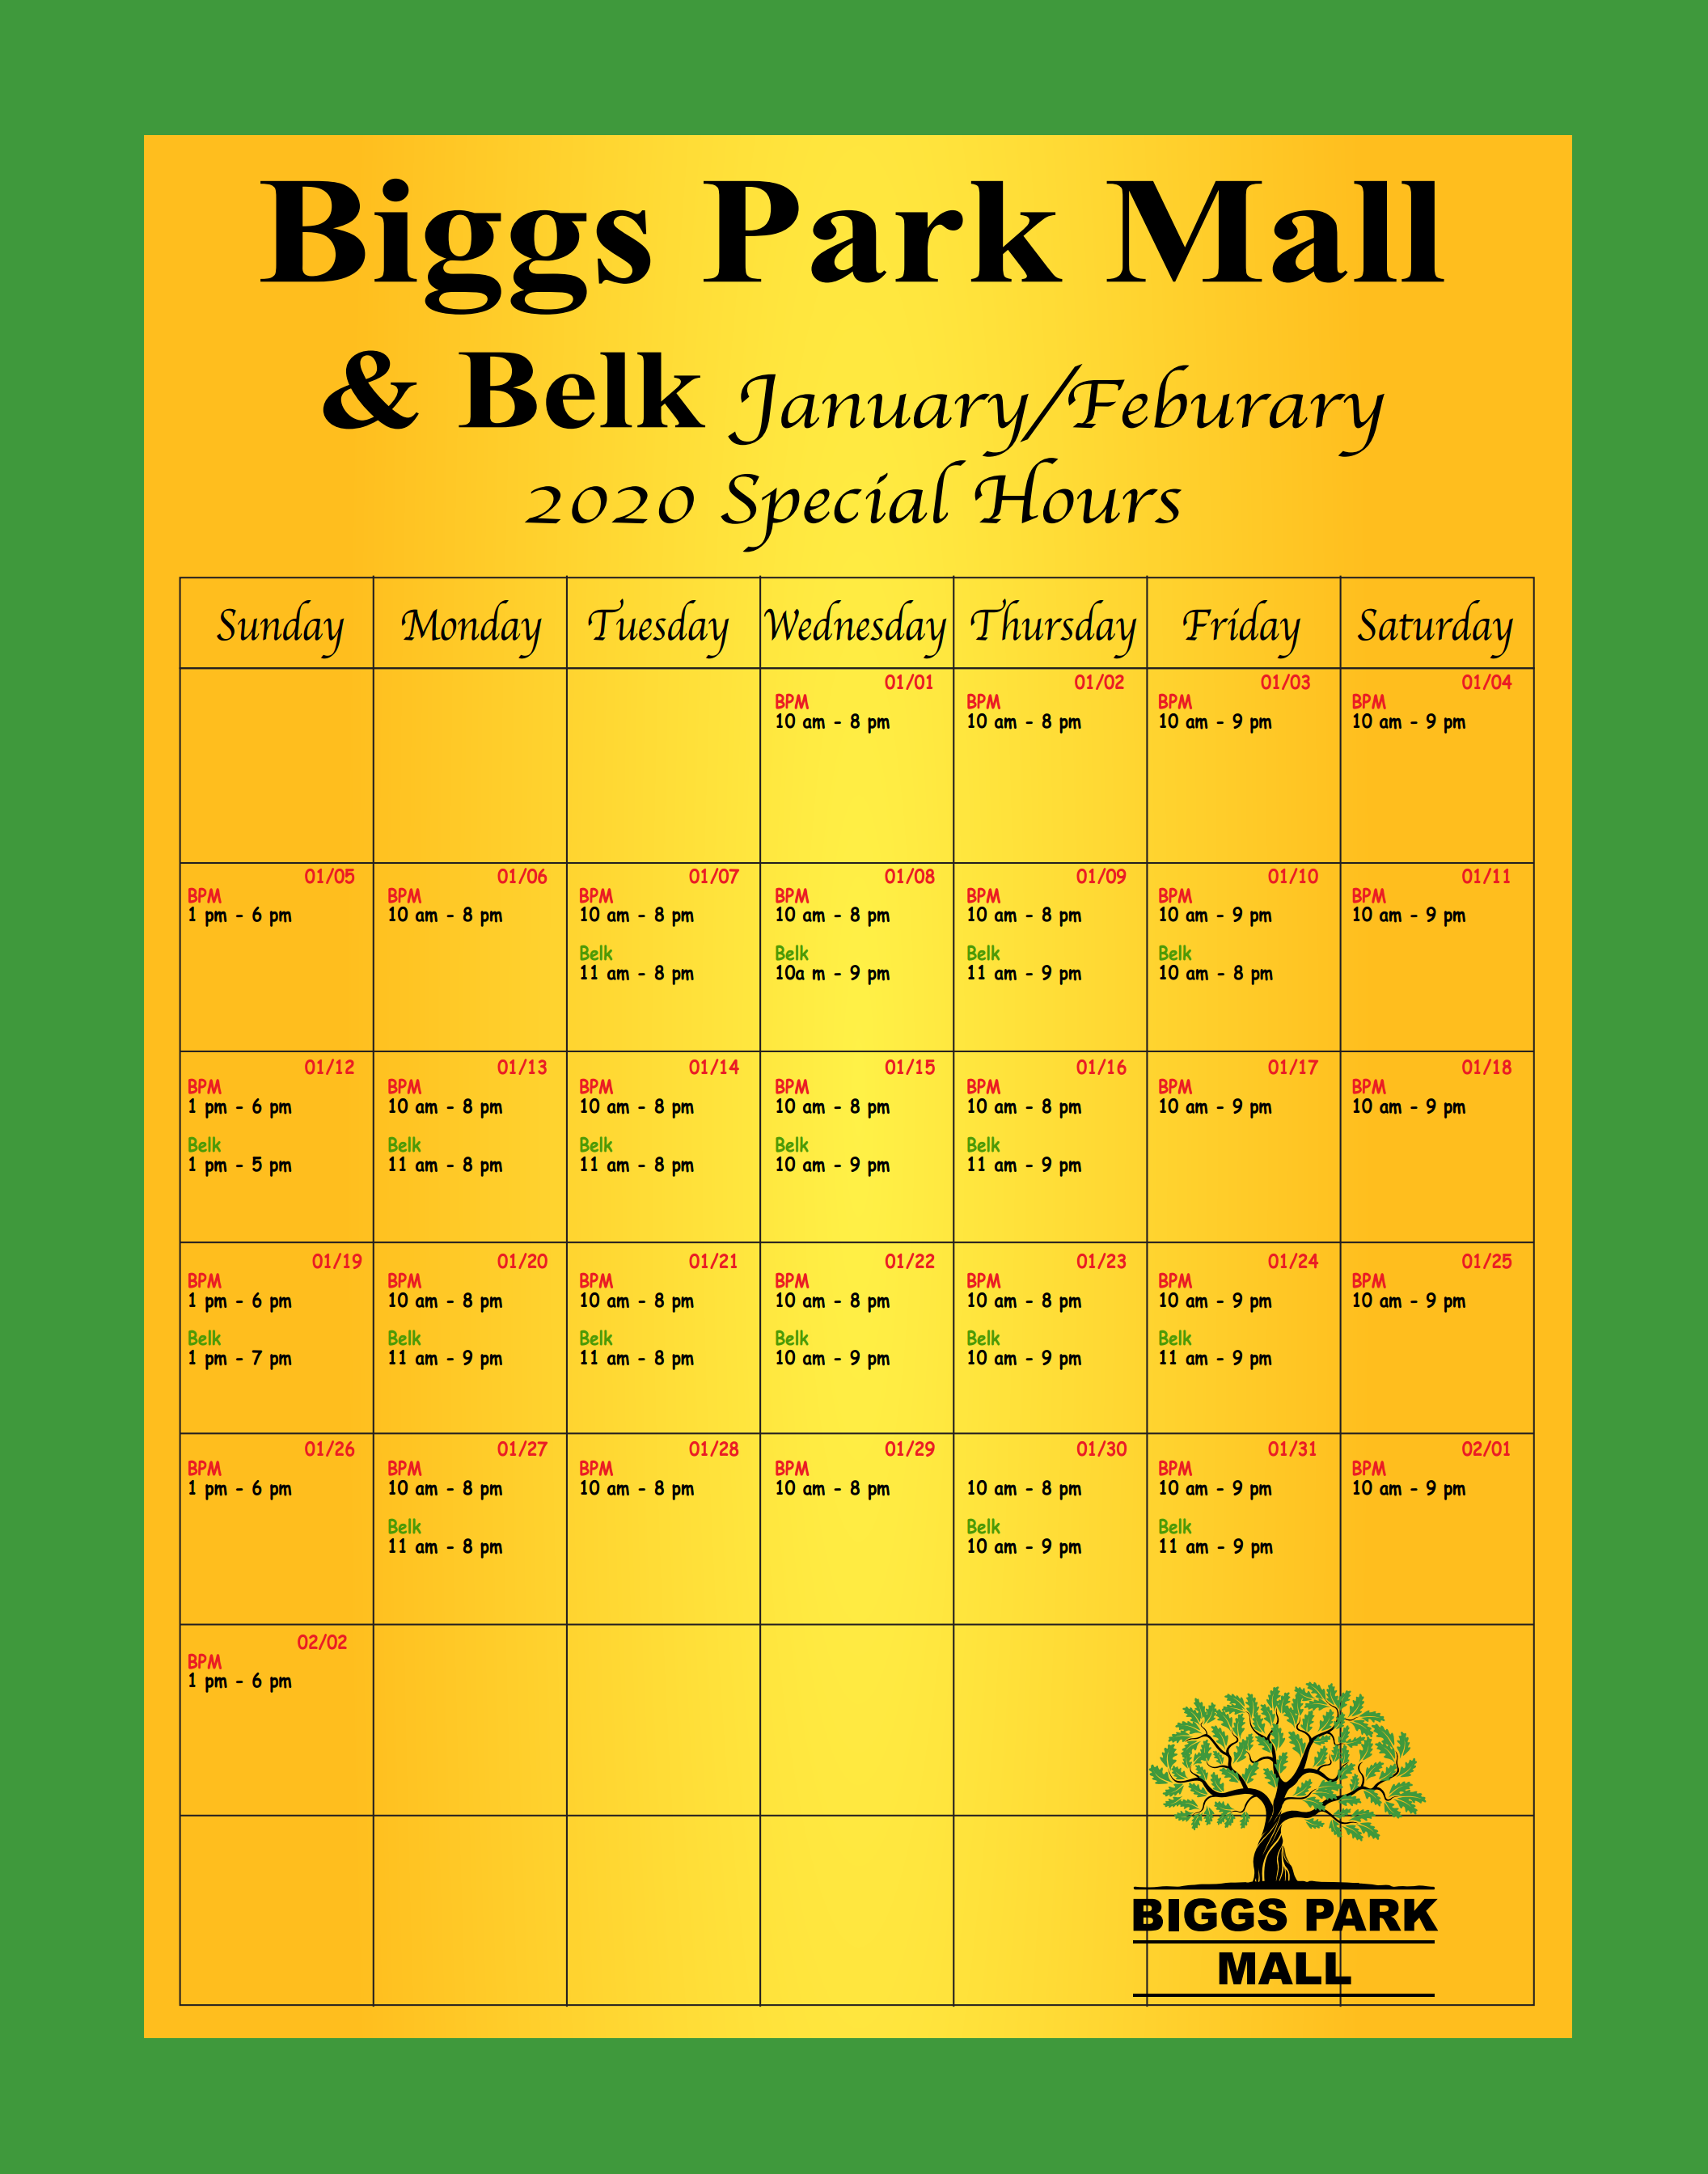 New Mall Hours & Belk Hours